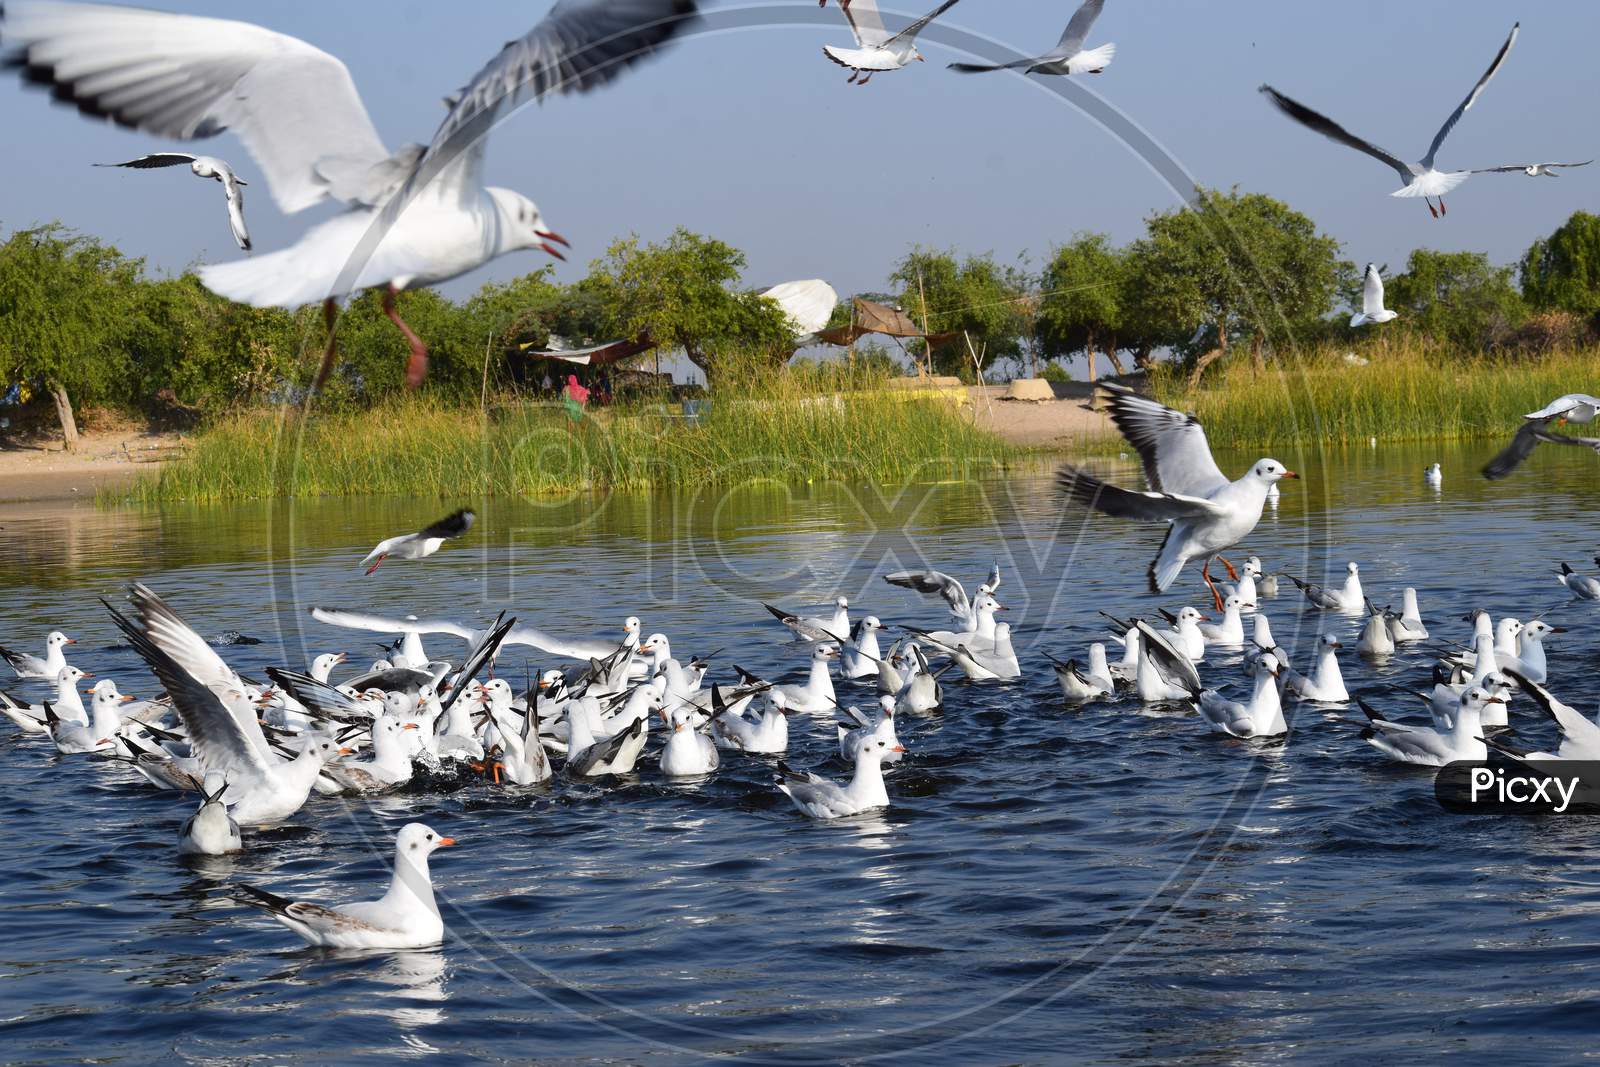 Brown Headed Seagulls Floating And Flying In Nalsarovar Lake In Gujarat India.